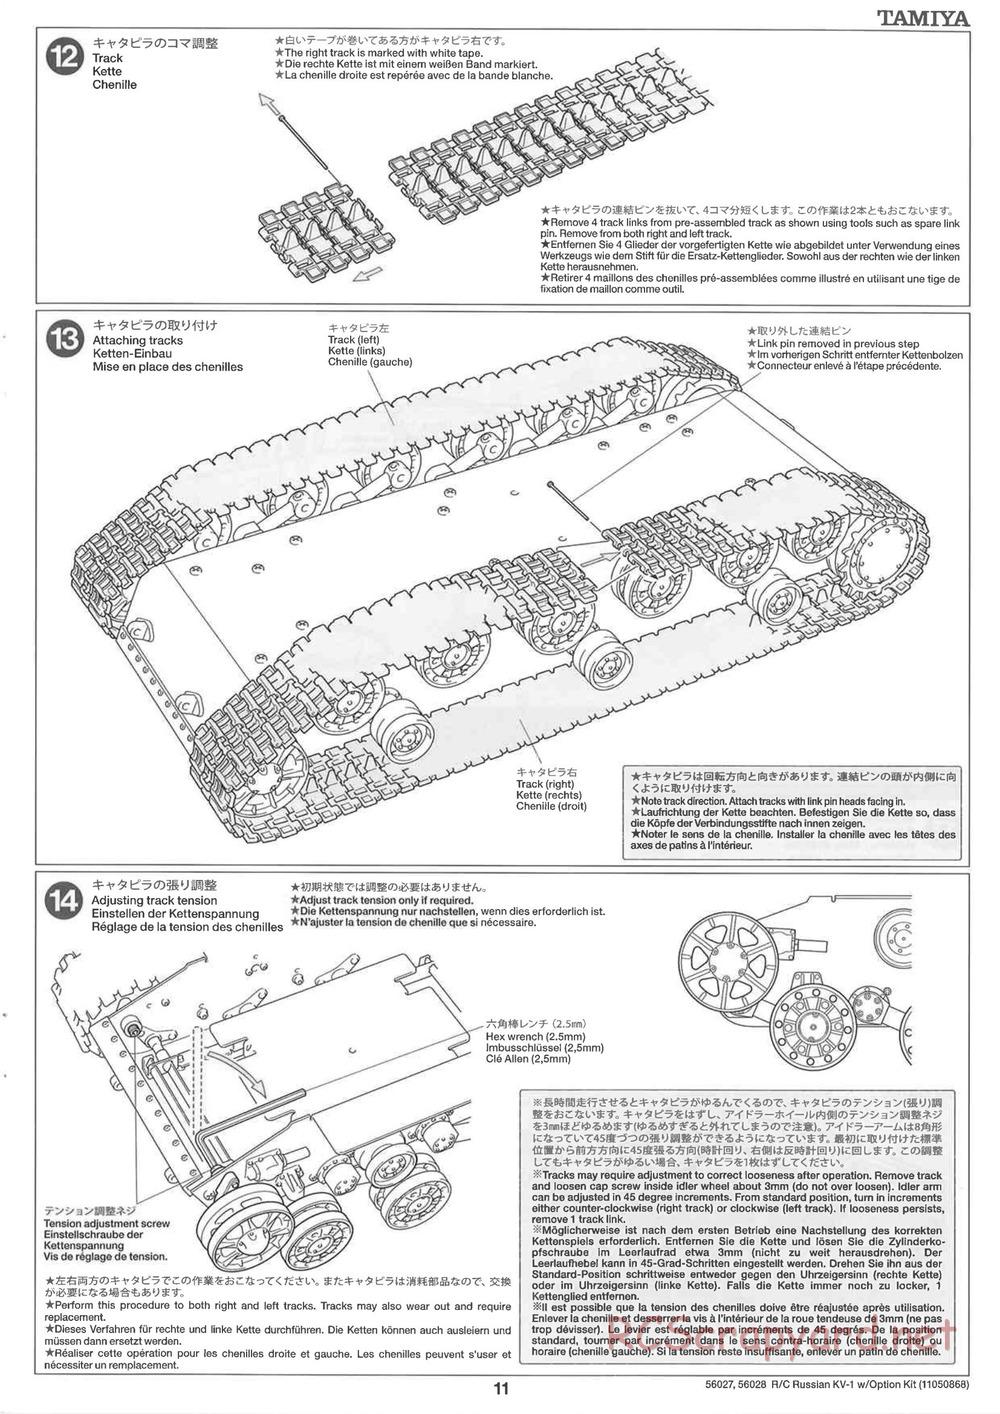 Tamiya - Russian Heavy Tank KV-1 - 1/16 Scale Chassis - Manual - Page 11